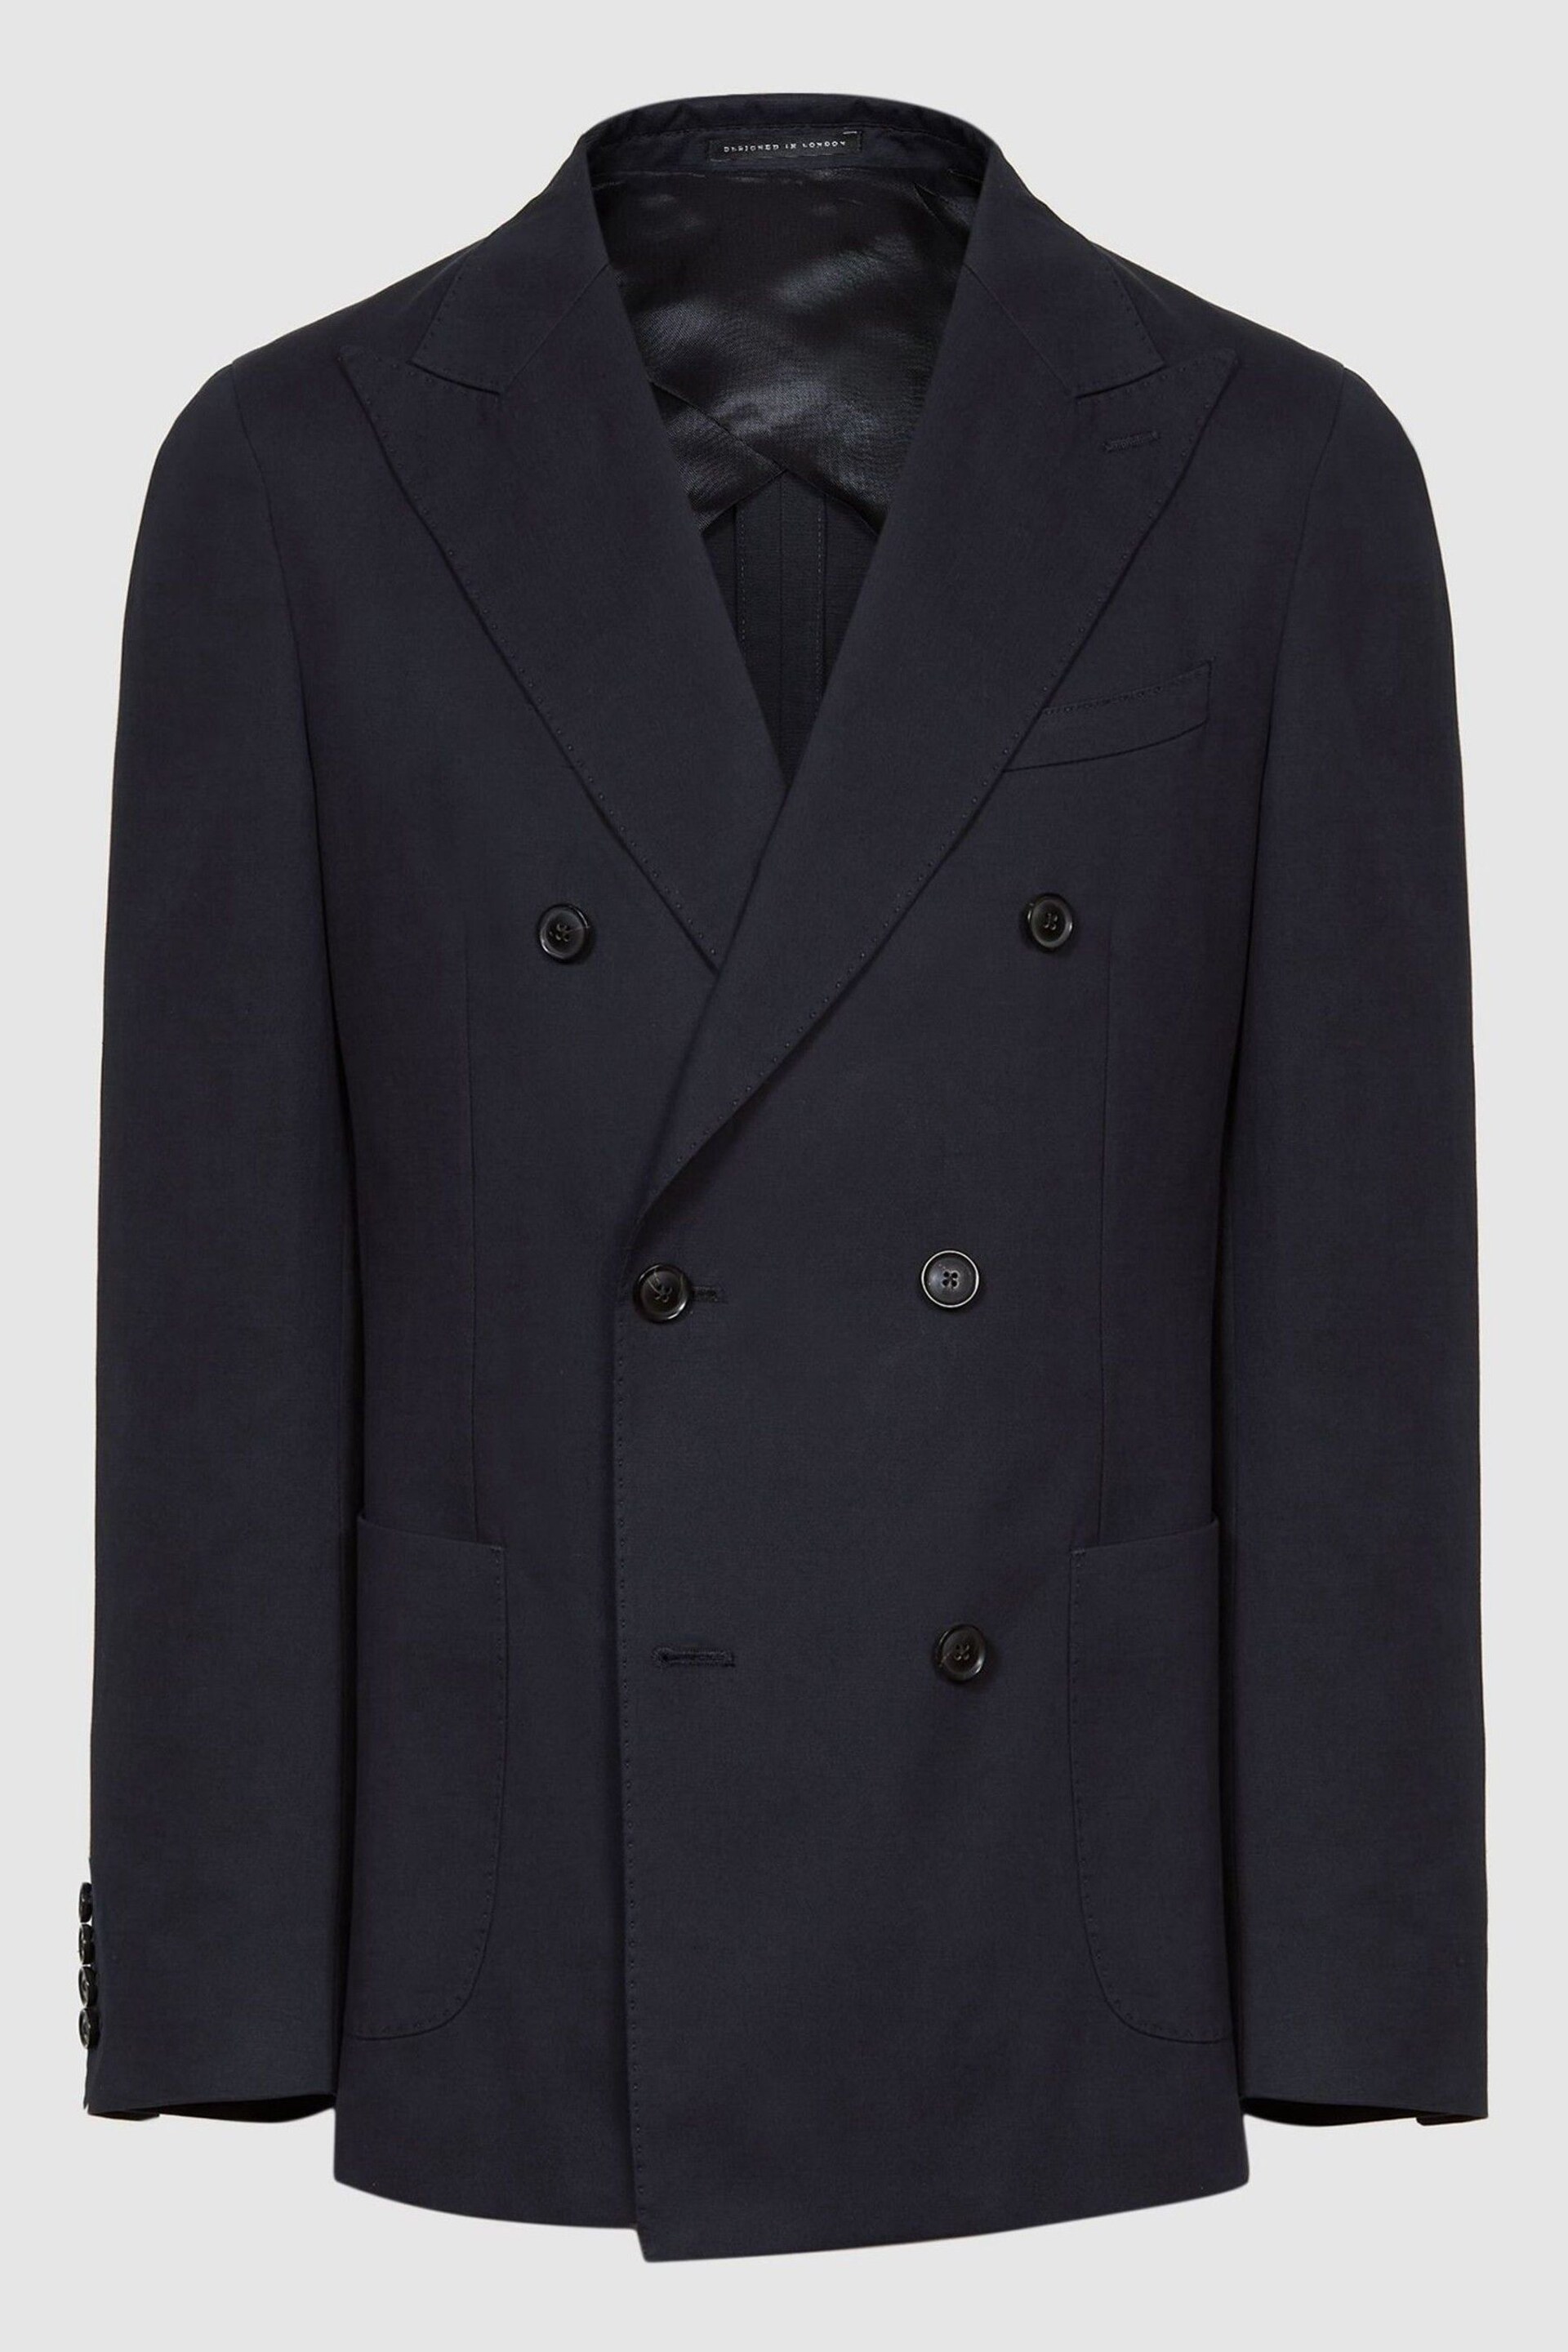 Reiss Navy Class Double Breasted Cotton-Linen Blazer - Image 2 of 7